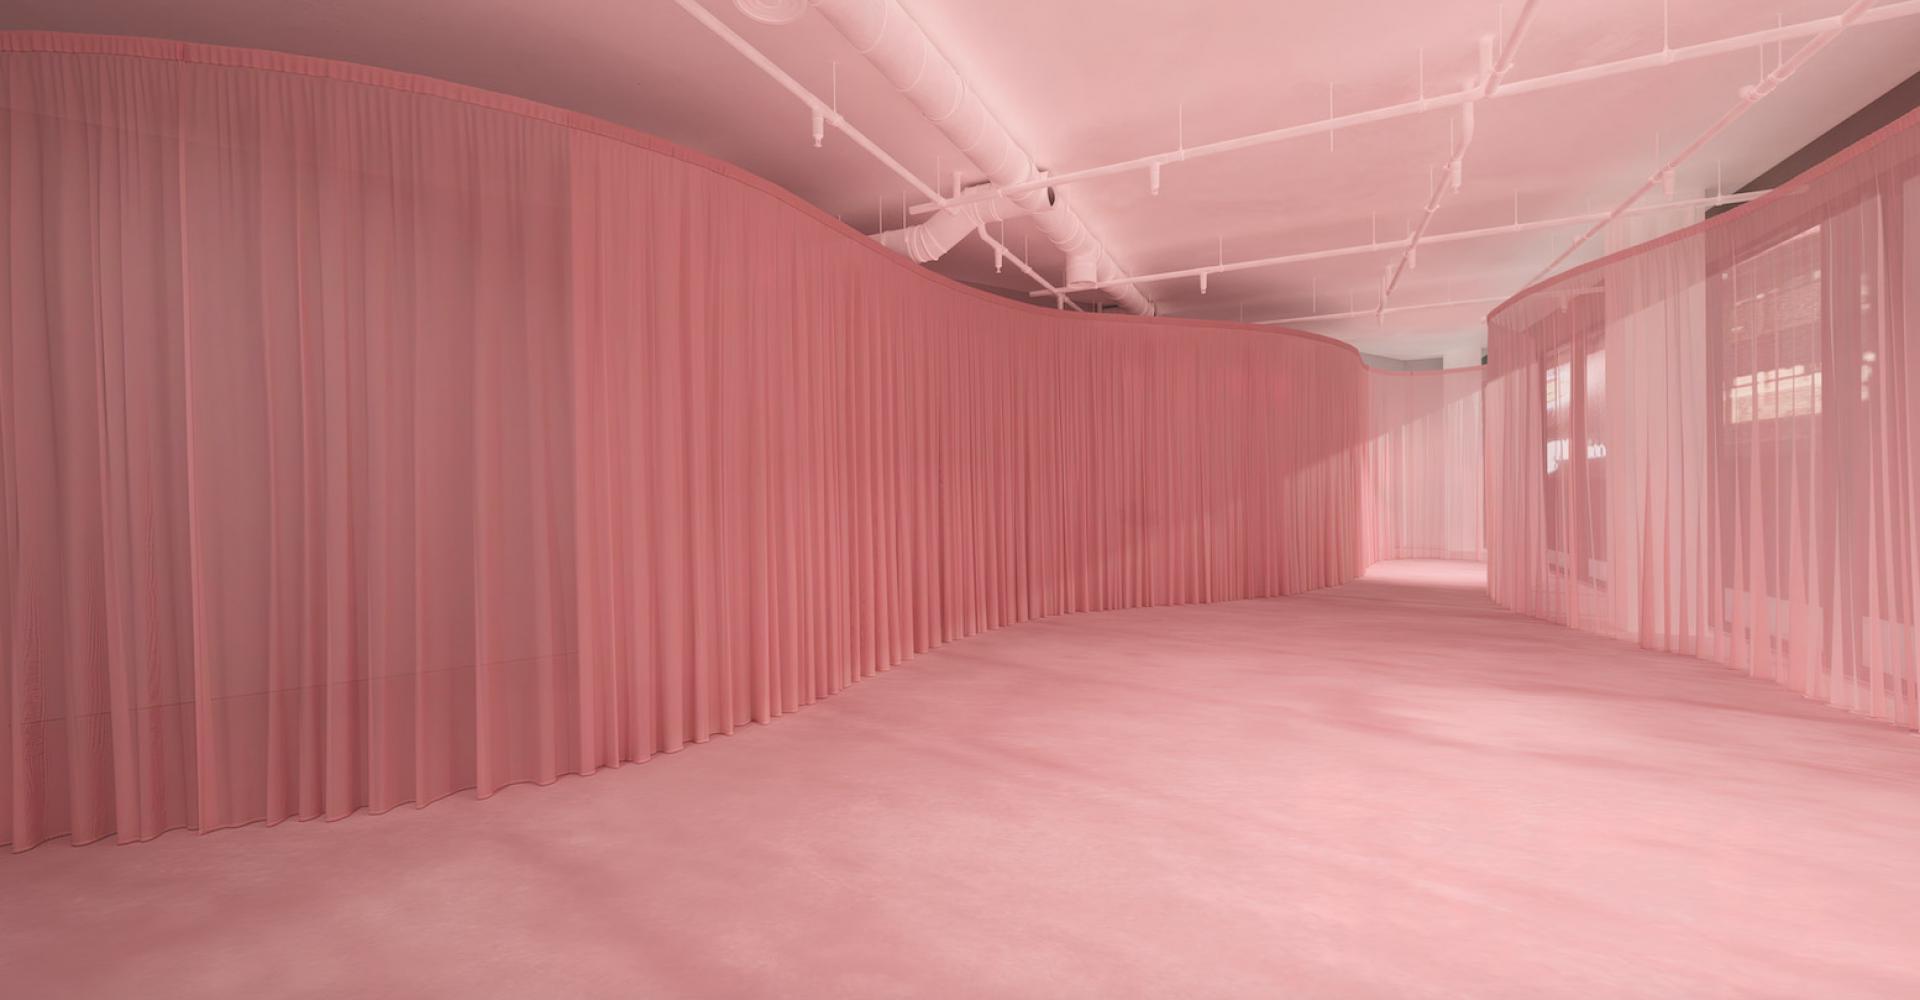 A very pink room